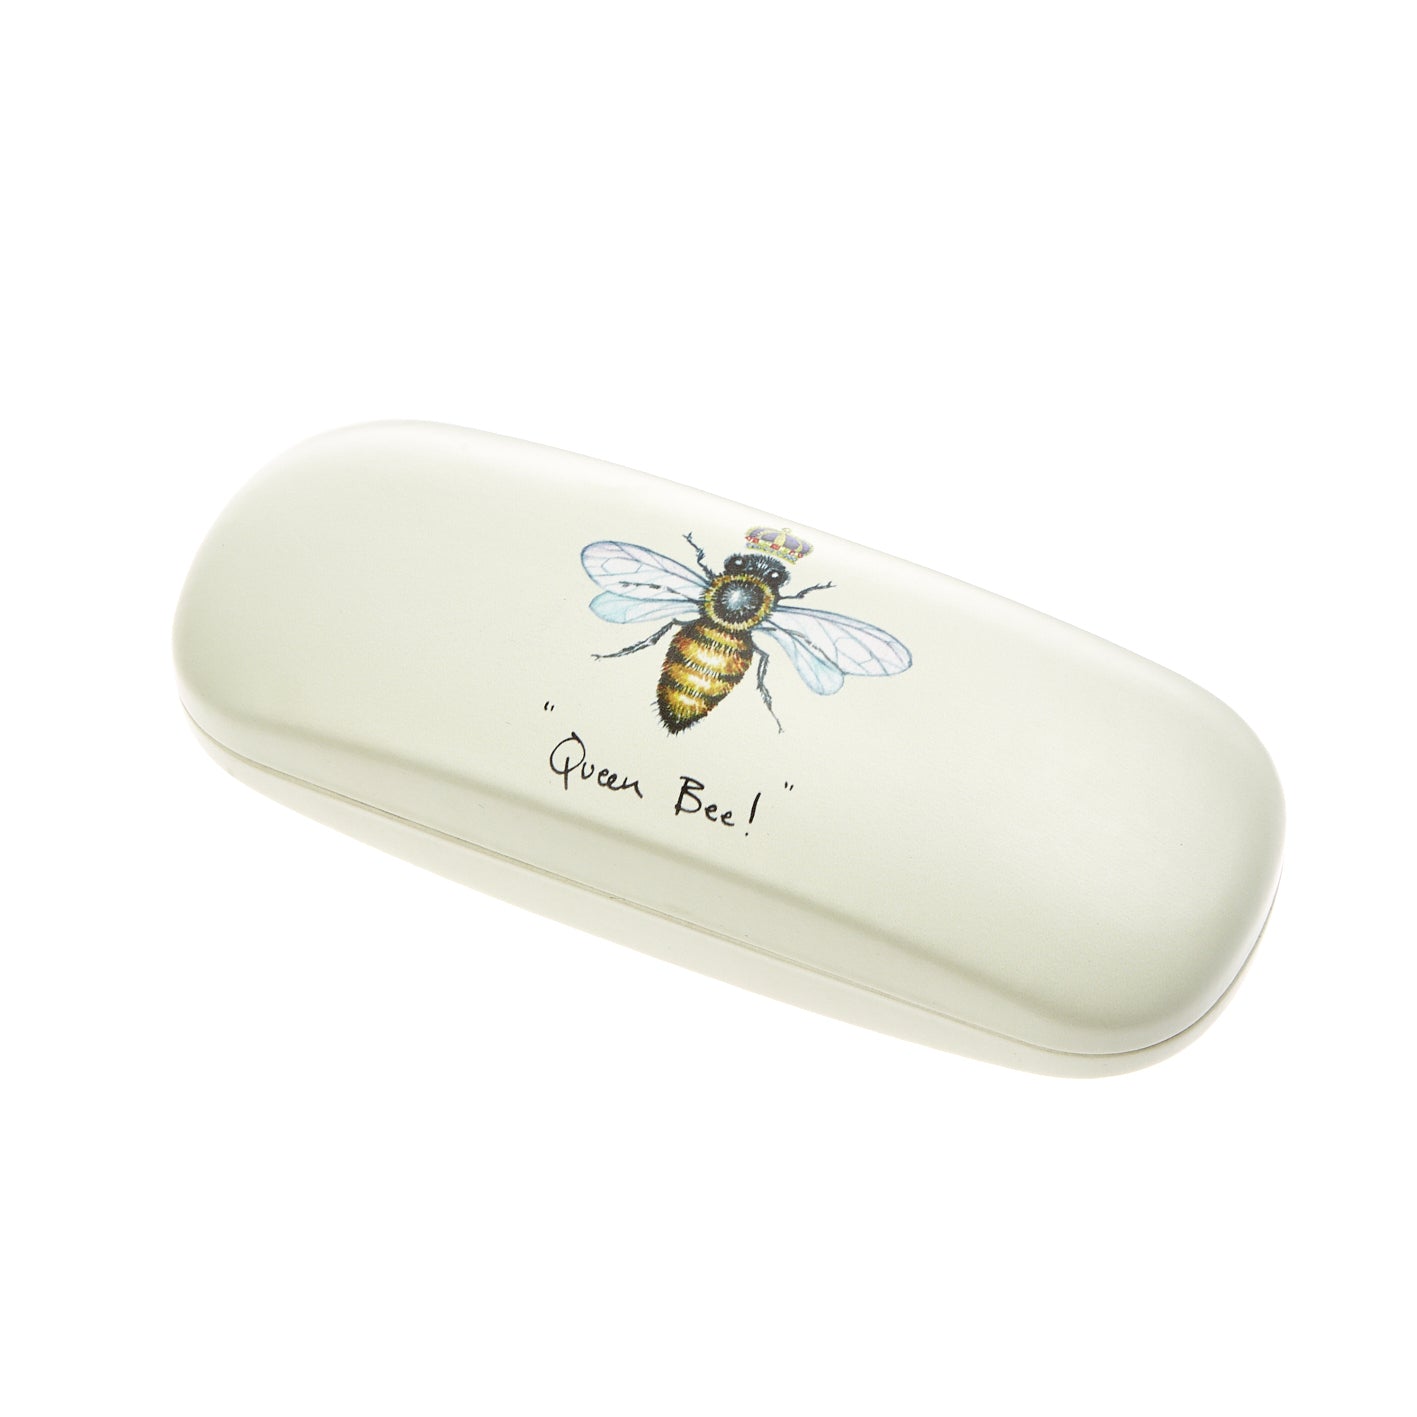 "Queen Bee!" with Crown Glasses Case